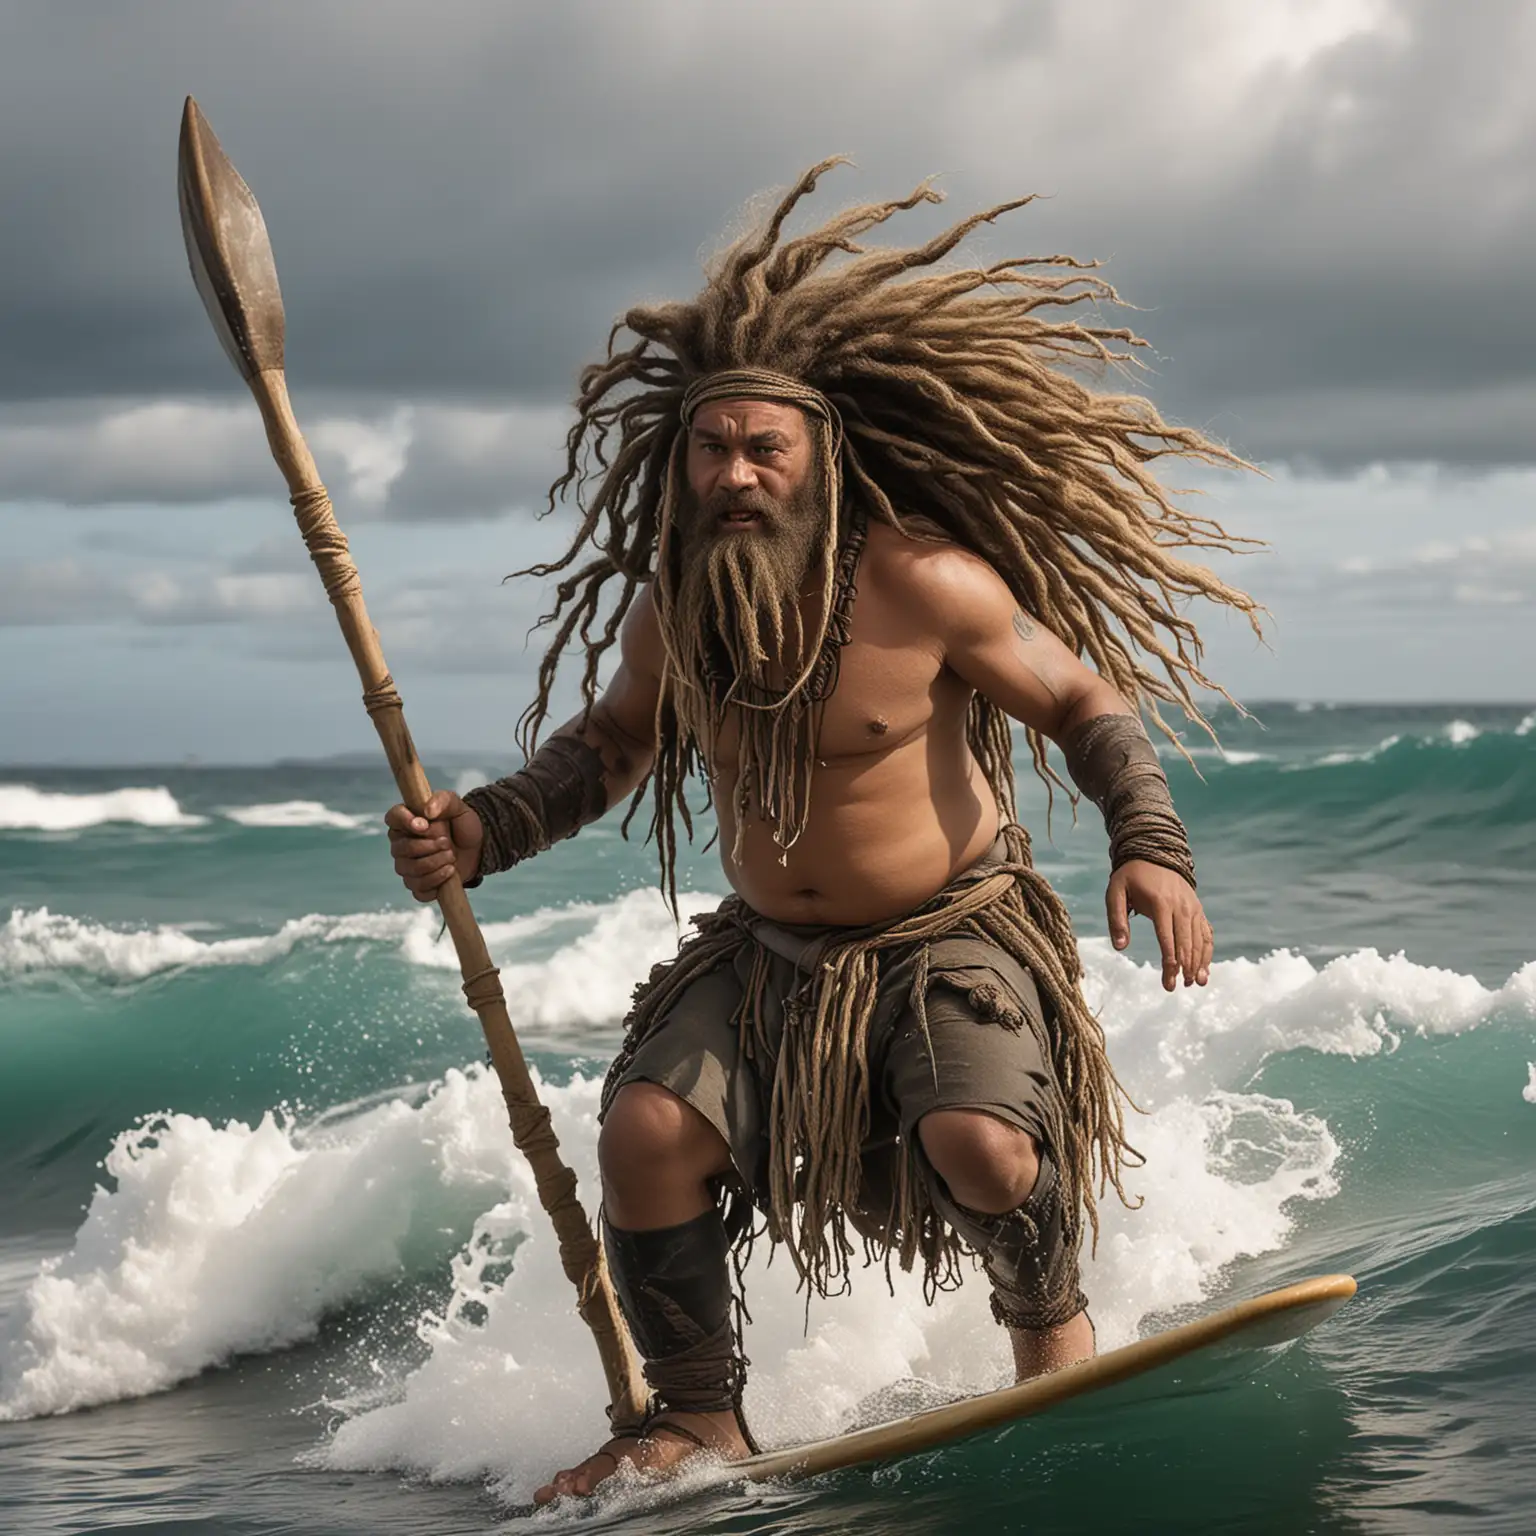 Islander dwarf with thick dreadlocks surfing while holding a spear